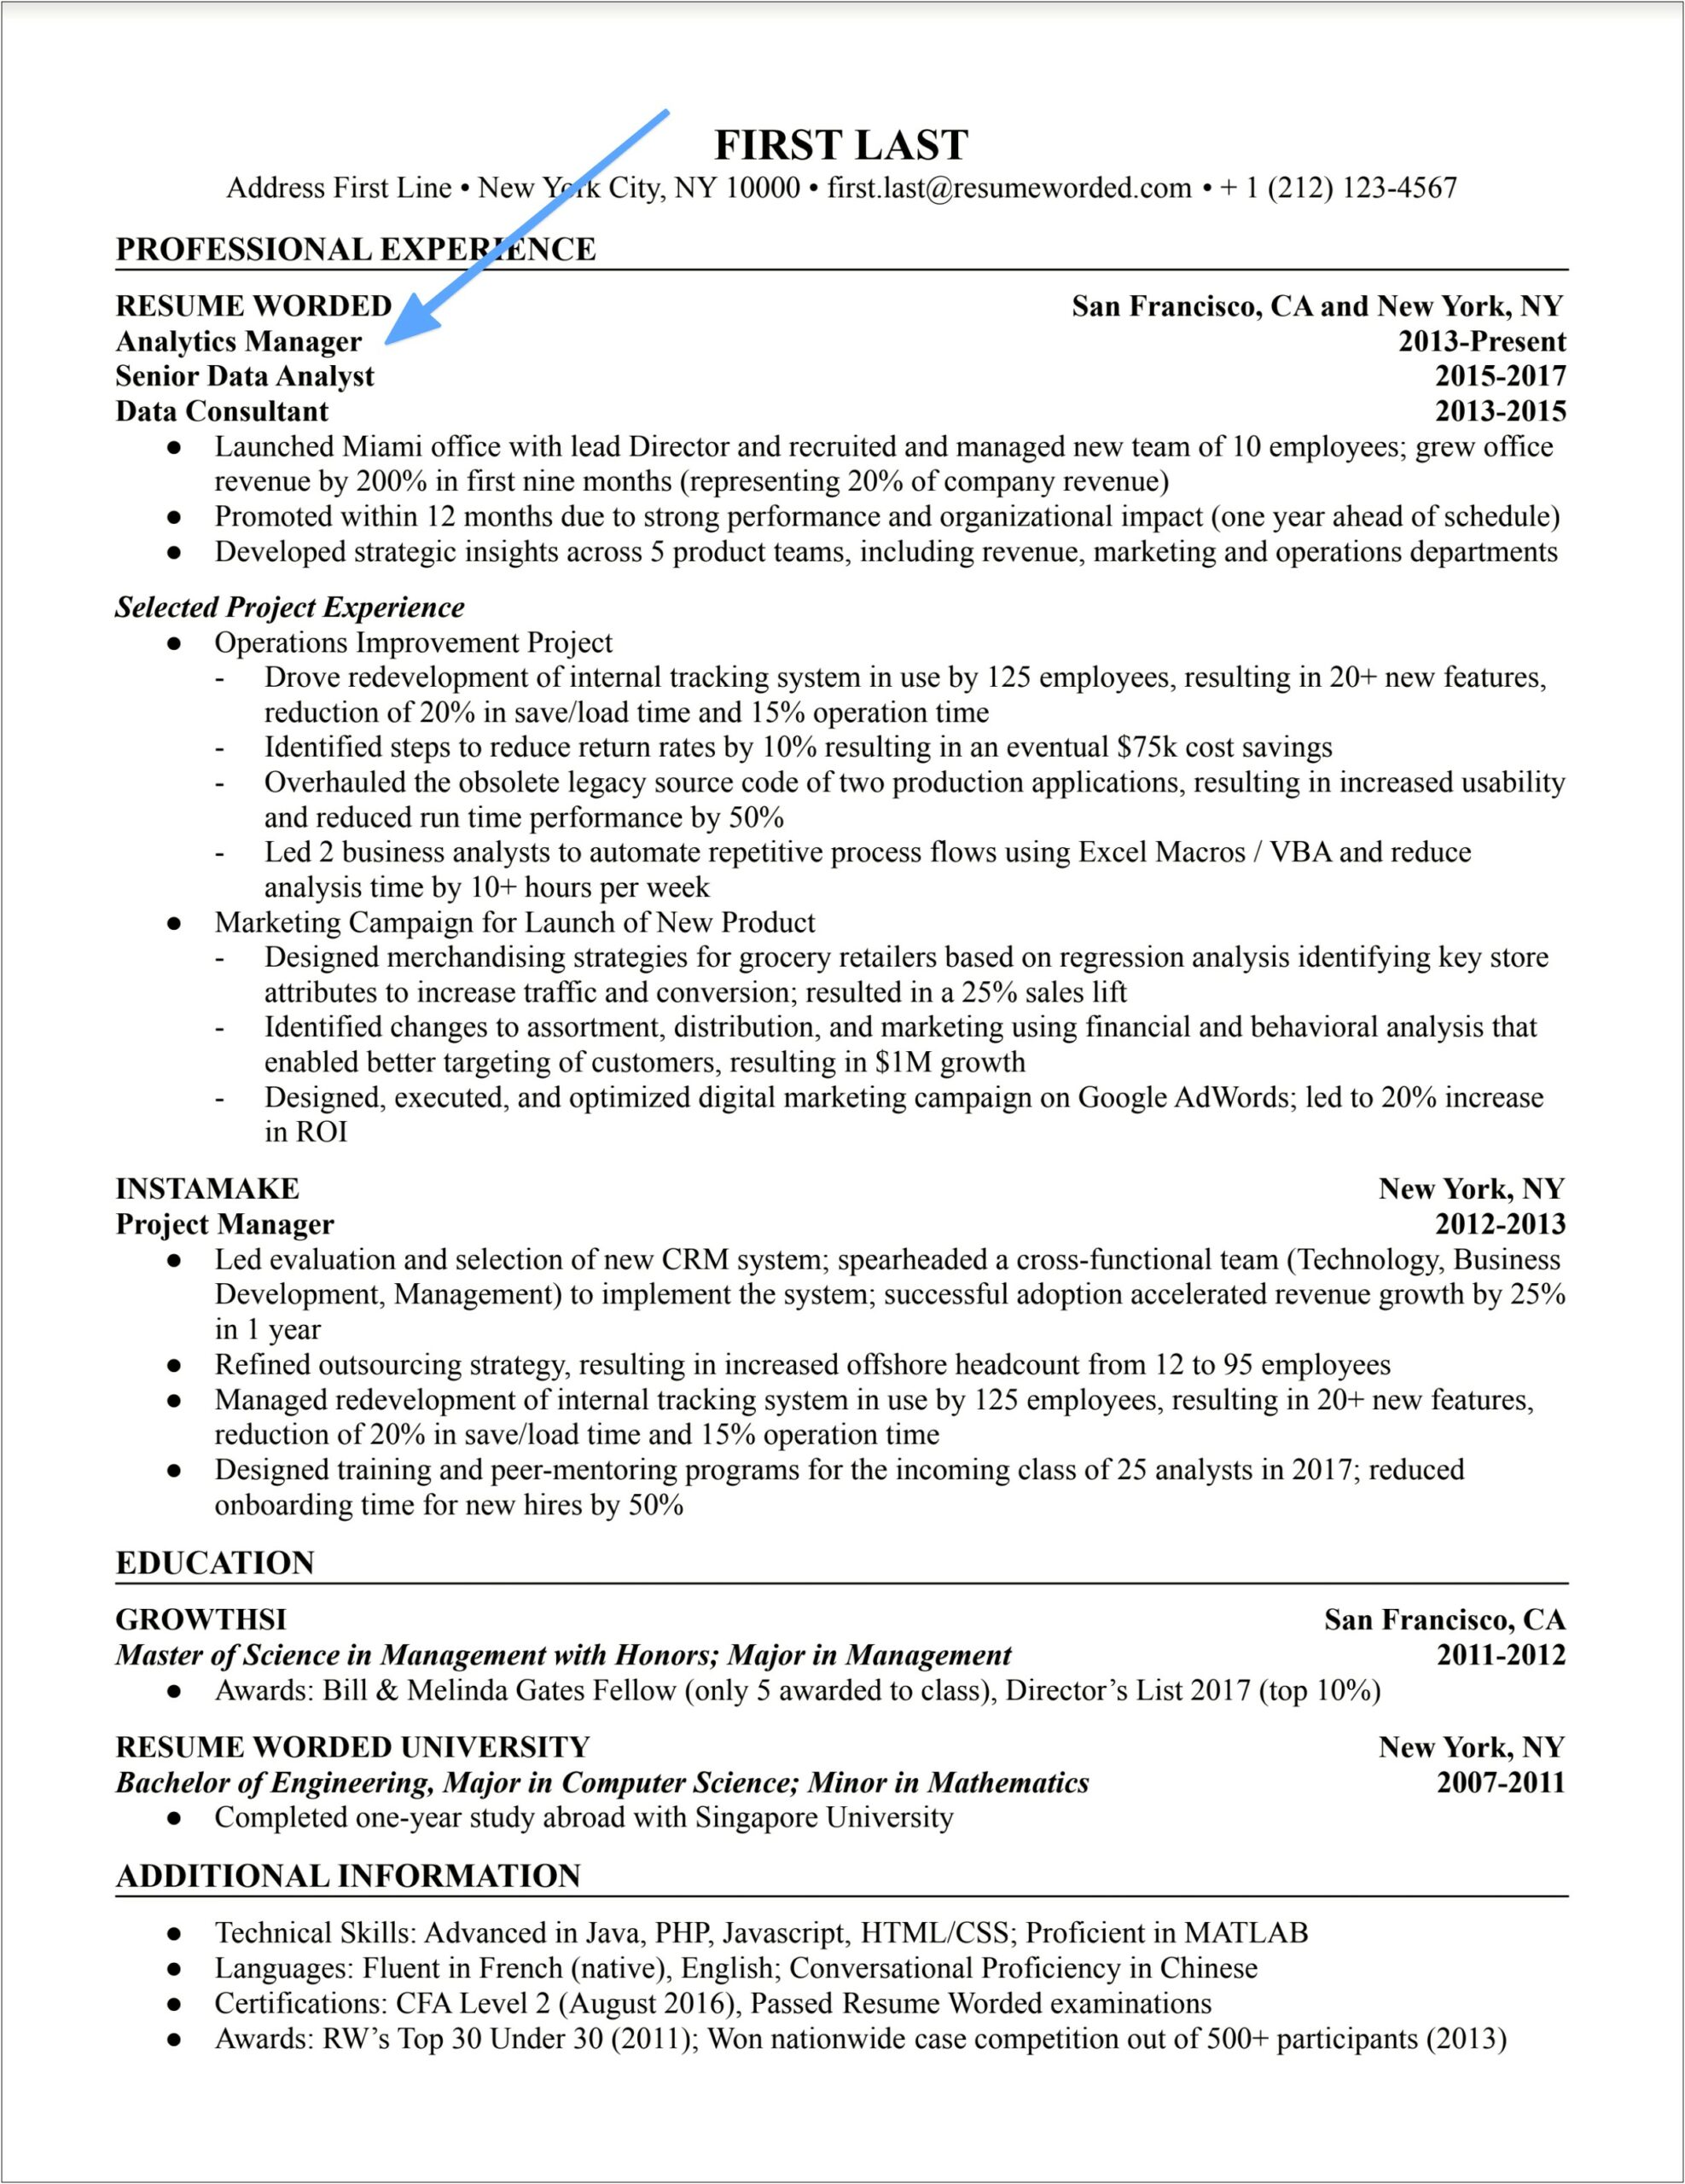 Data Analysis Manager Resume Examples